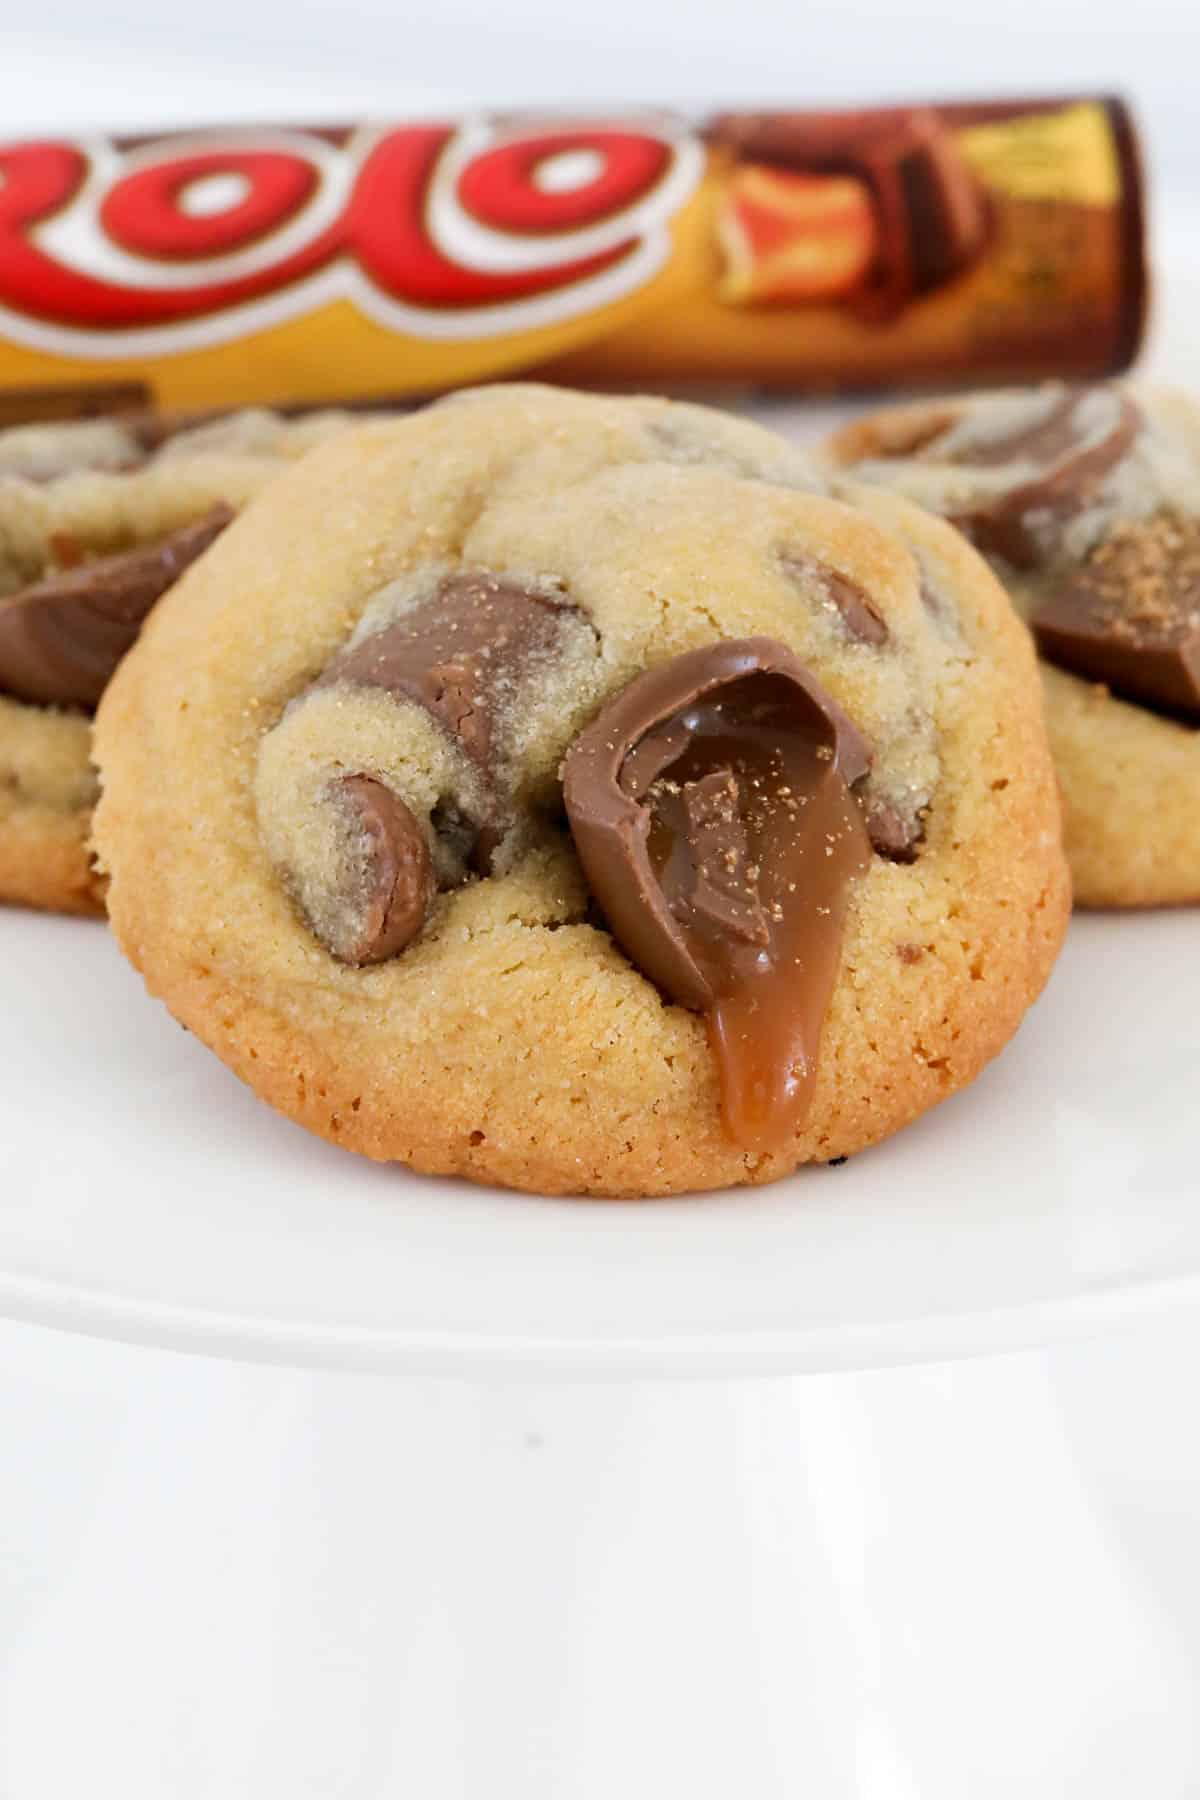 A gooey Rolo chocolate oozing out of a chocolate chip cookie.